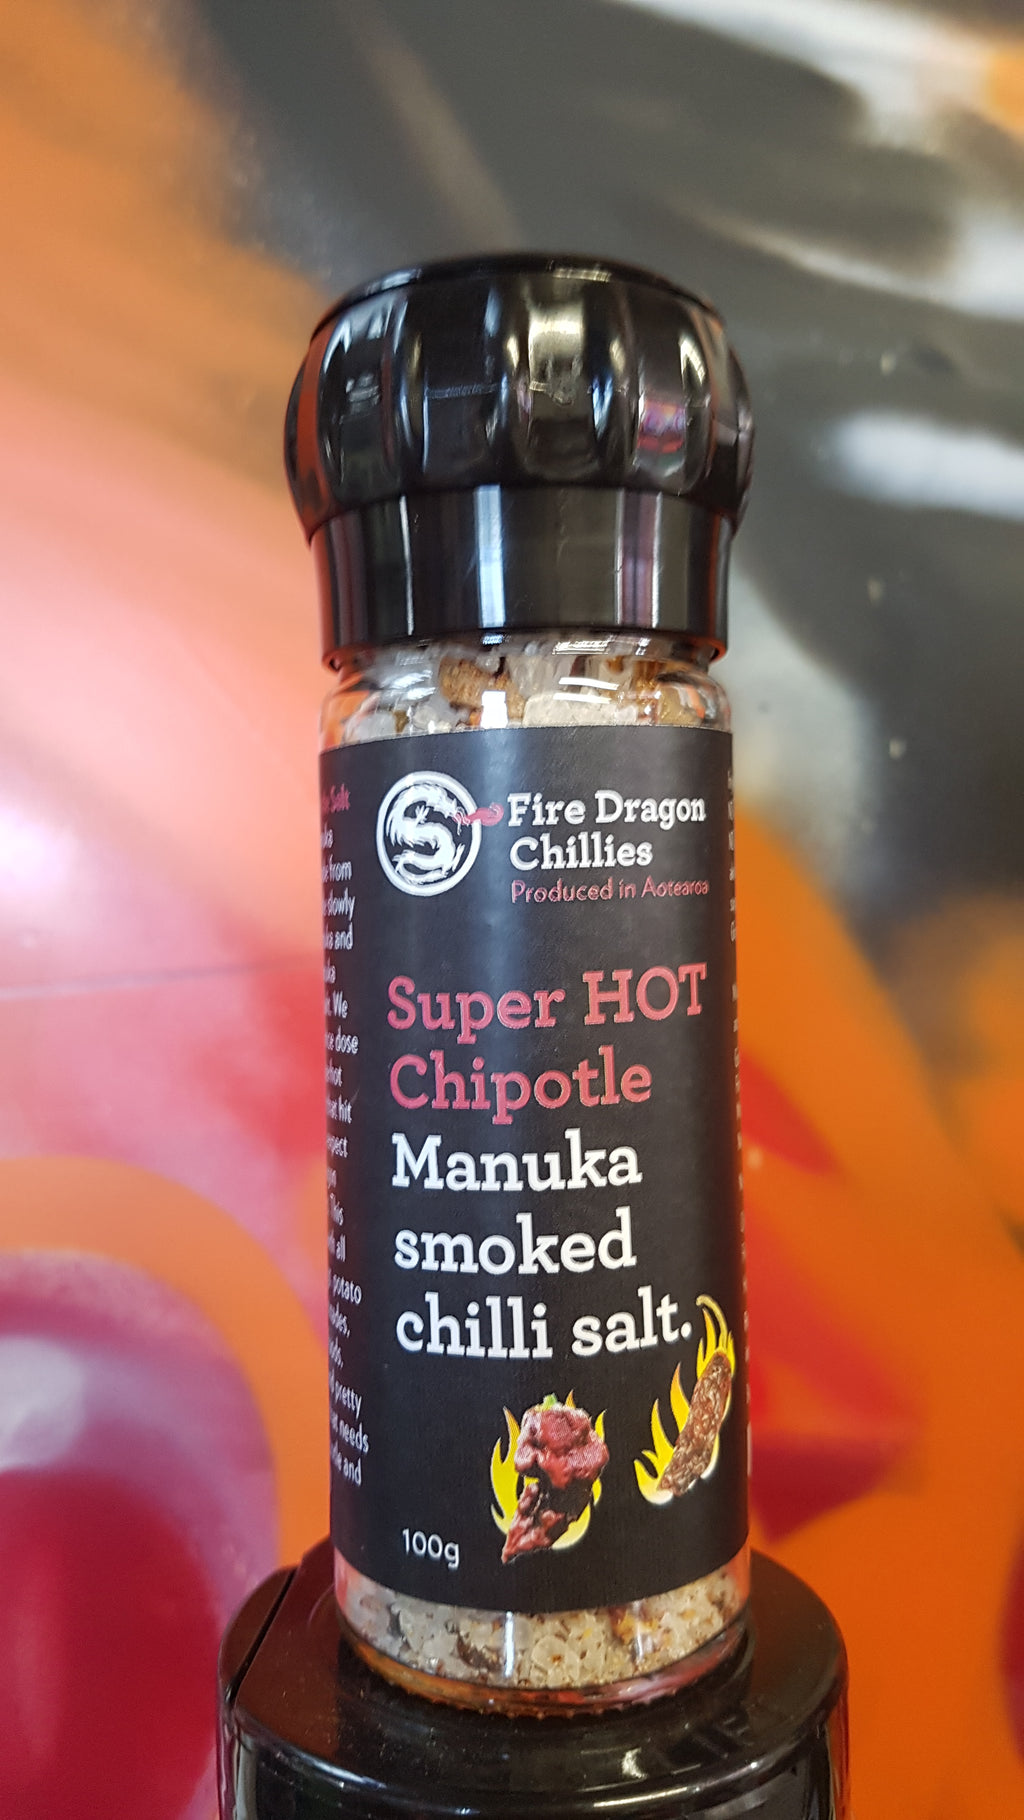 Super Hot Chipotle and Manuka Smoked Salt Grinder 100g by Fire Dragon Chillies